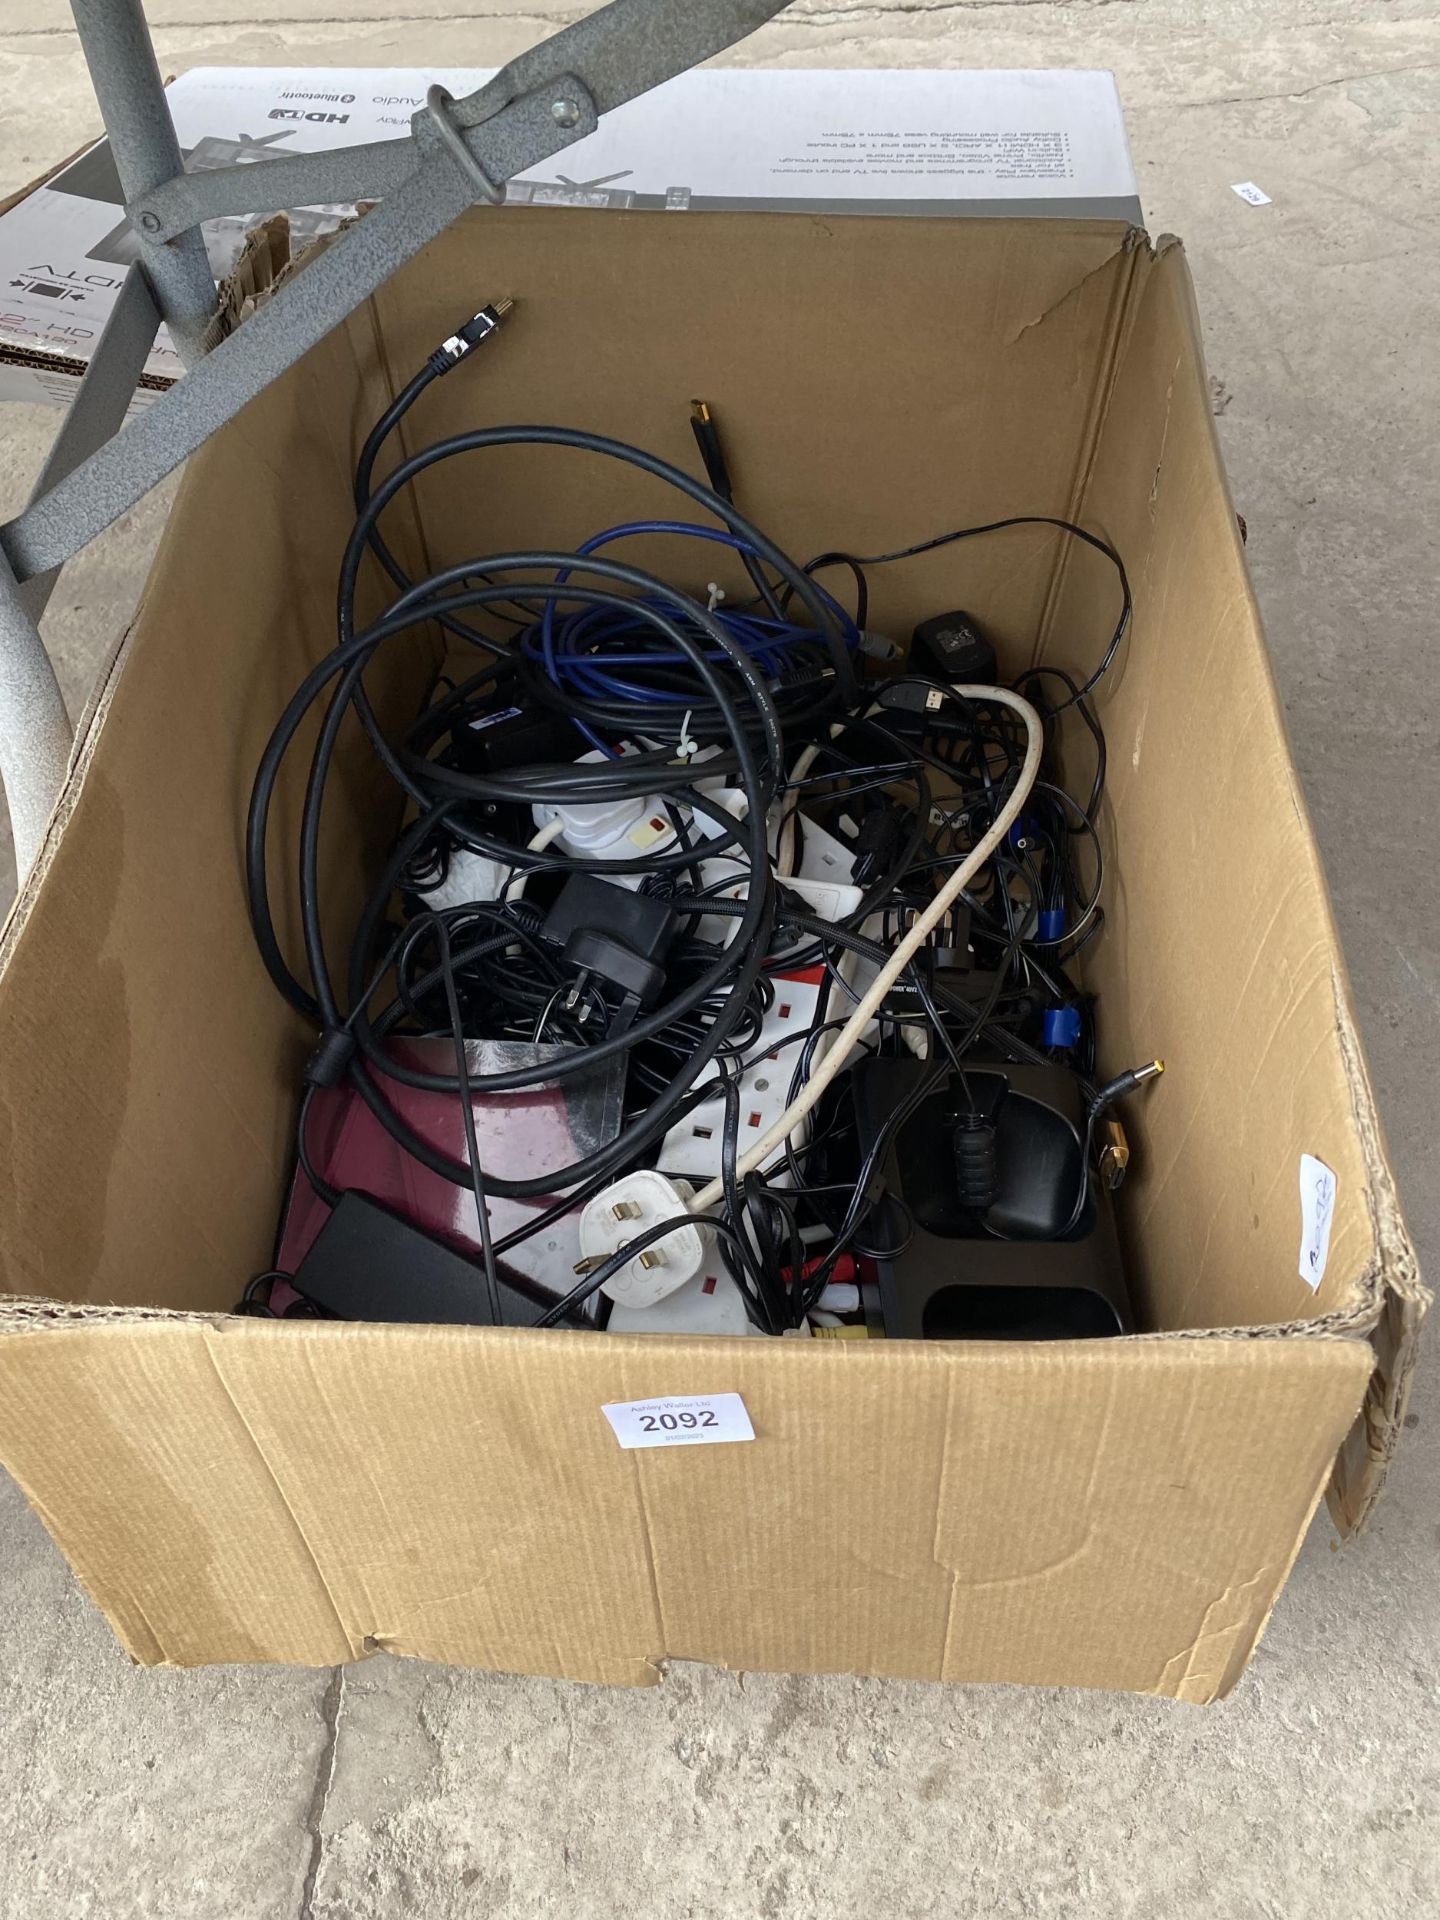 A LARGE ASSORTMENT OF CABLES AND CHARGERS